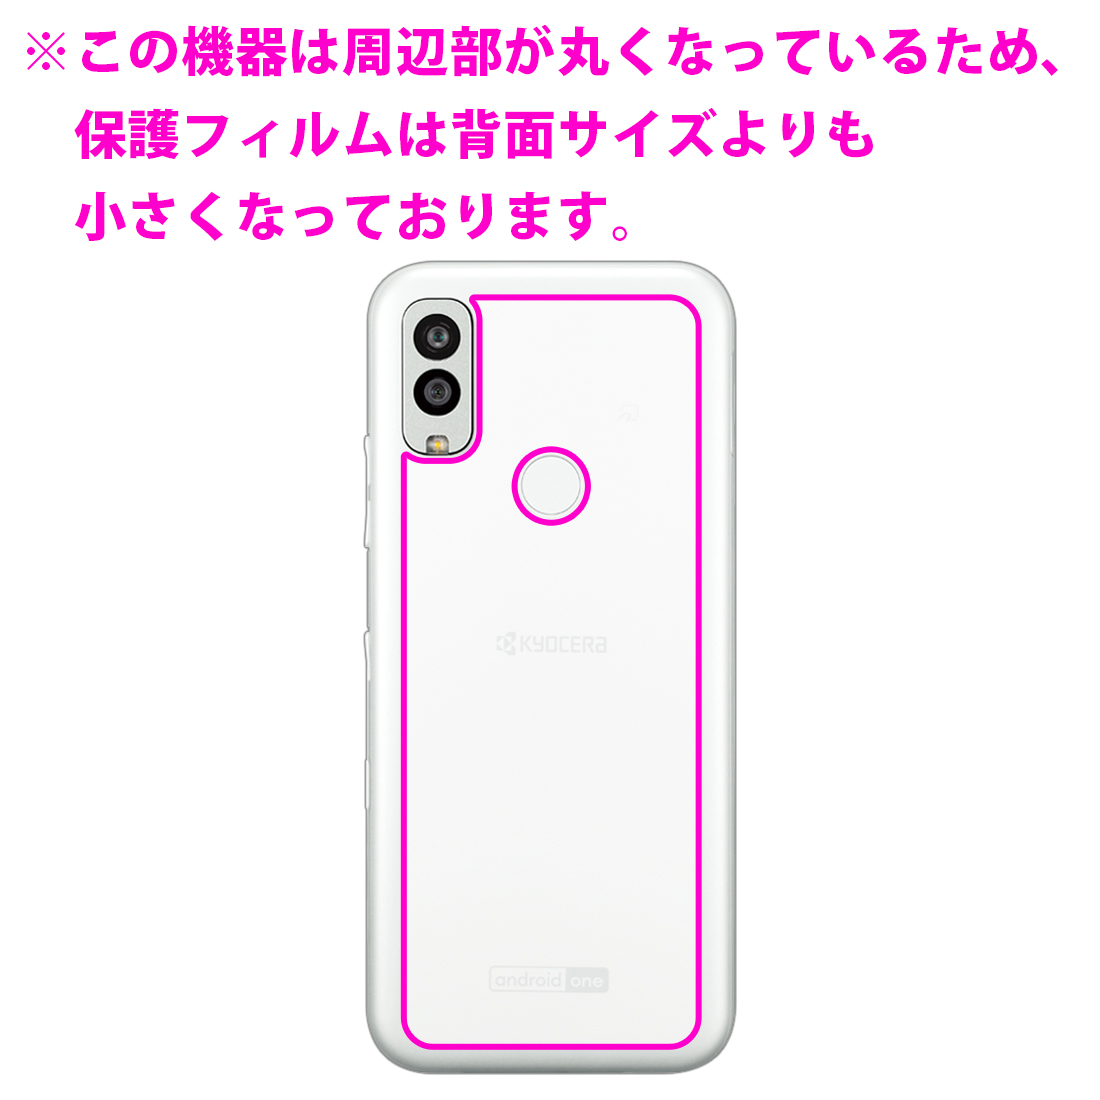 Android One S10対応 Perfect Shield 保護 フィルム [両面セット] 反射低減 防指紋 日本製｜pdar｜03